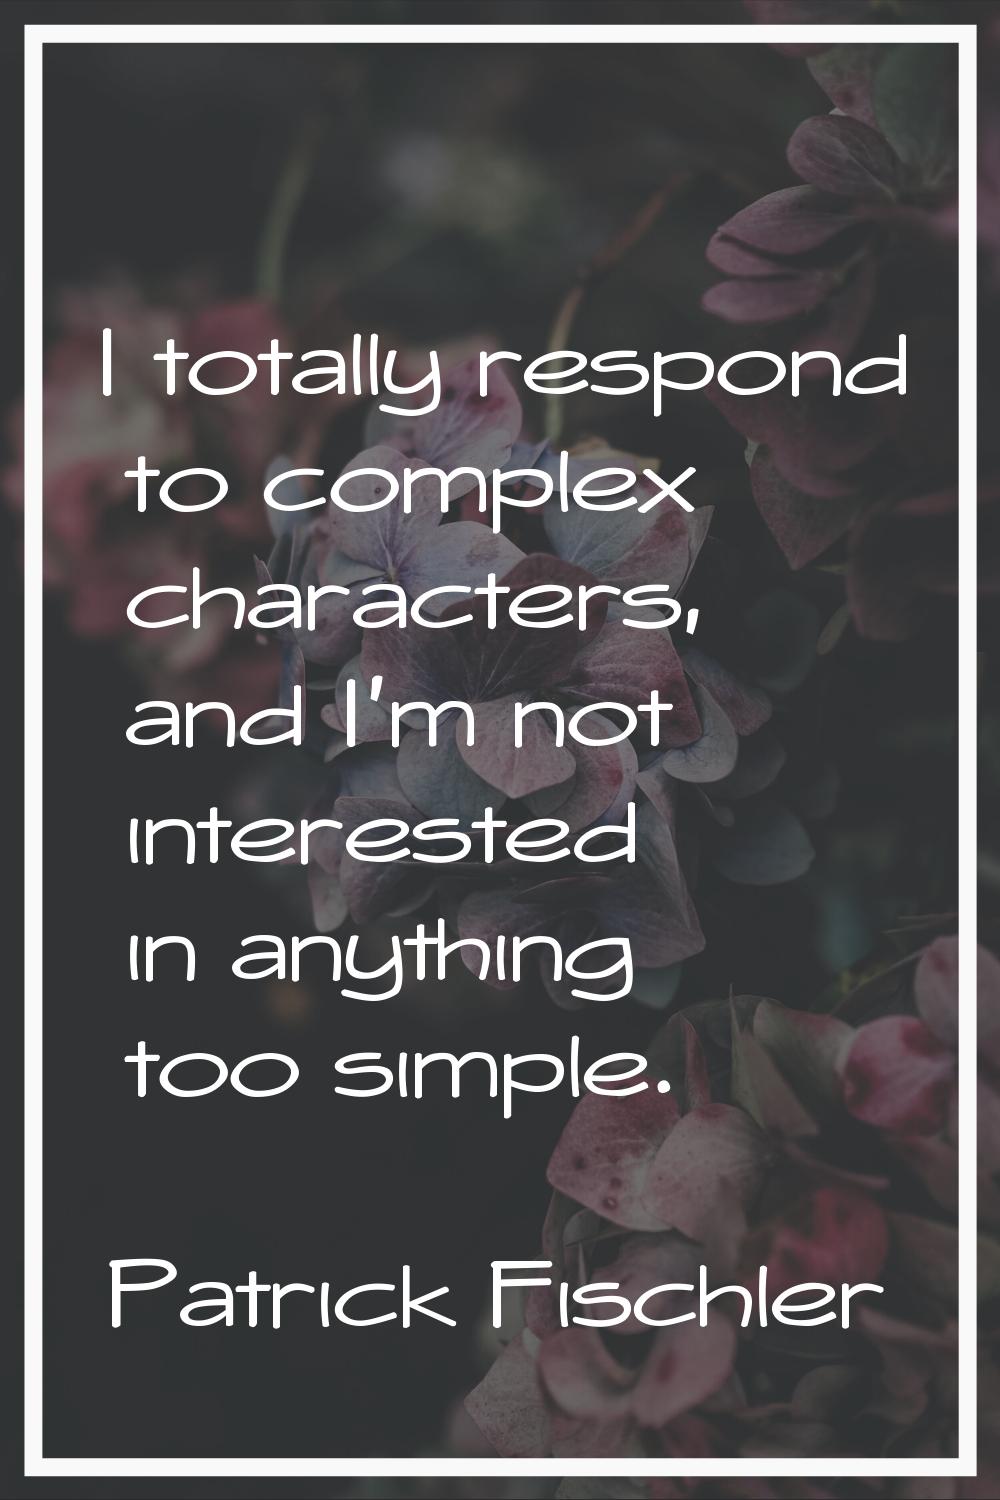 I totally respond to complex characters, and I'm not interested in anything too simple.